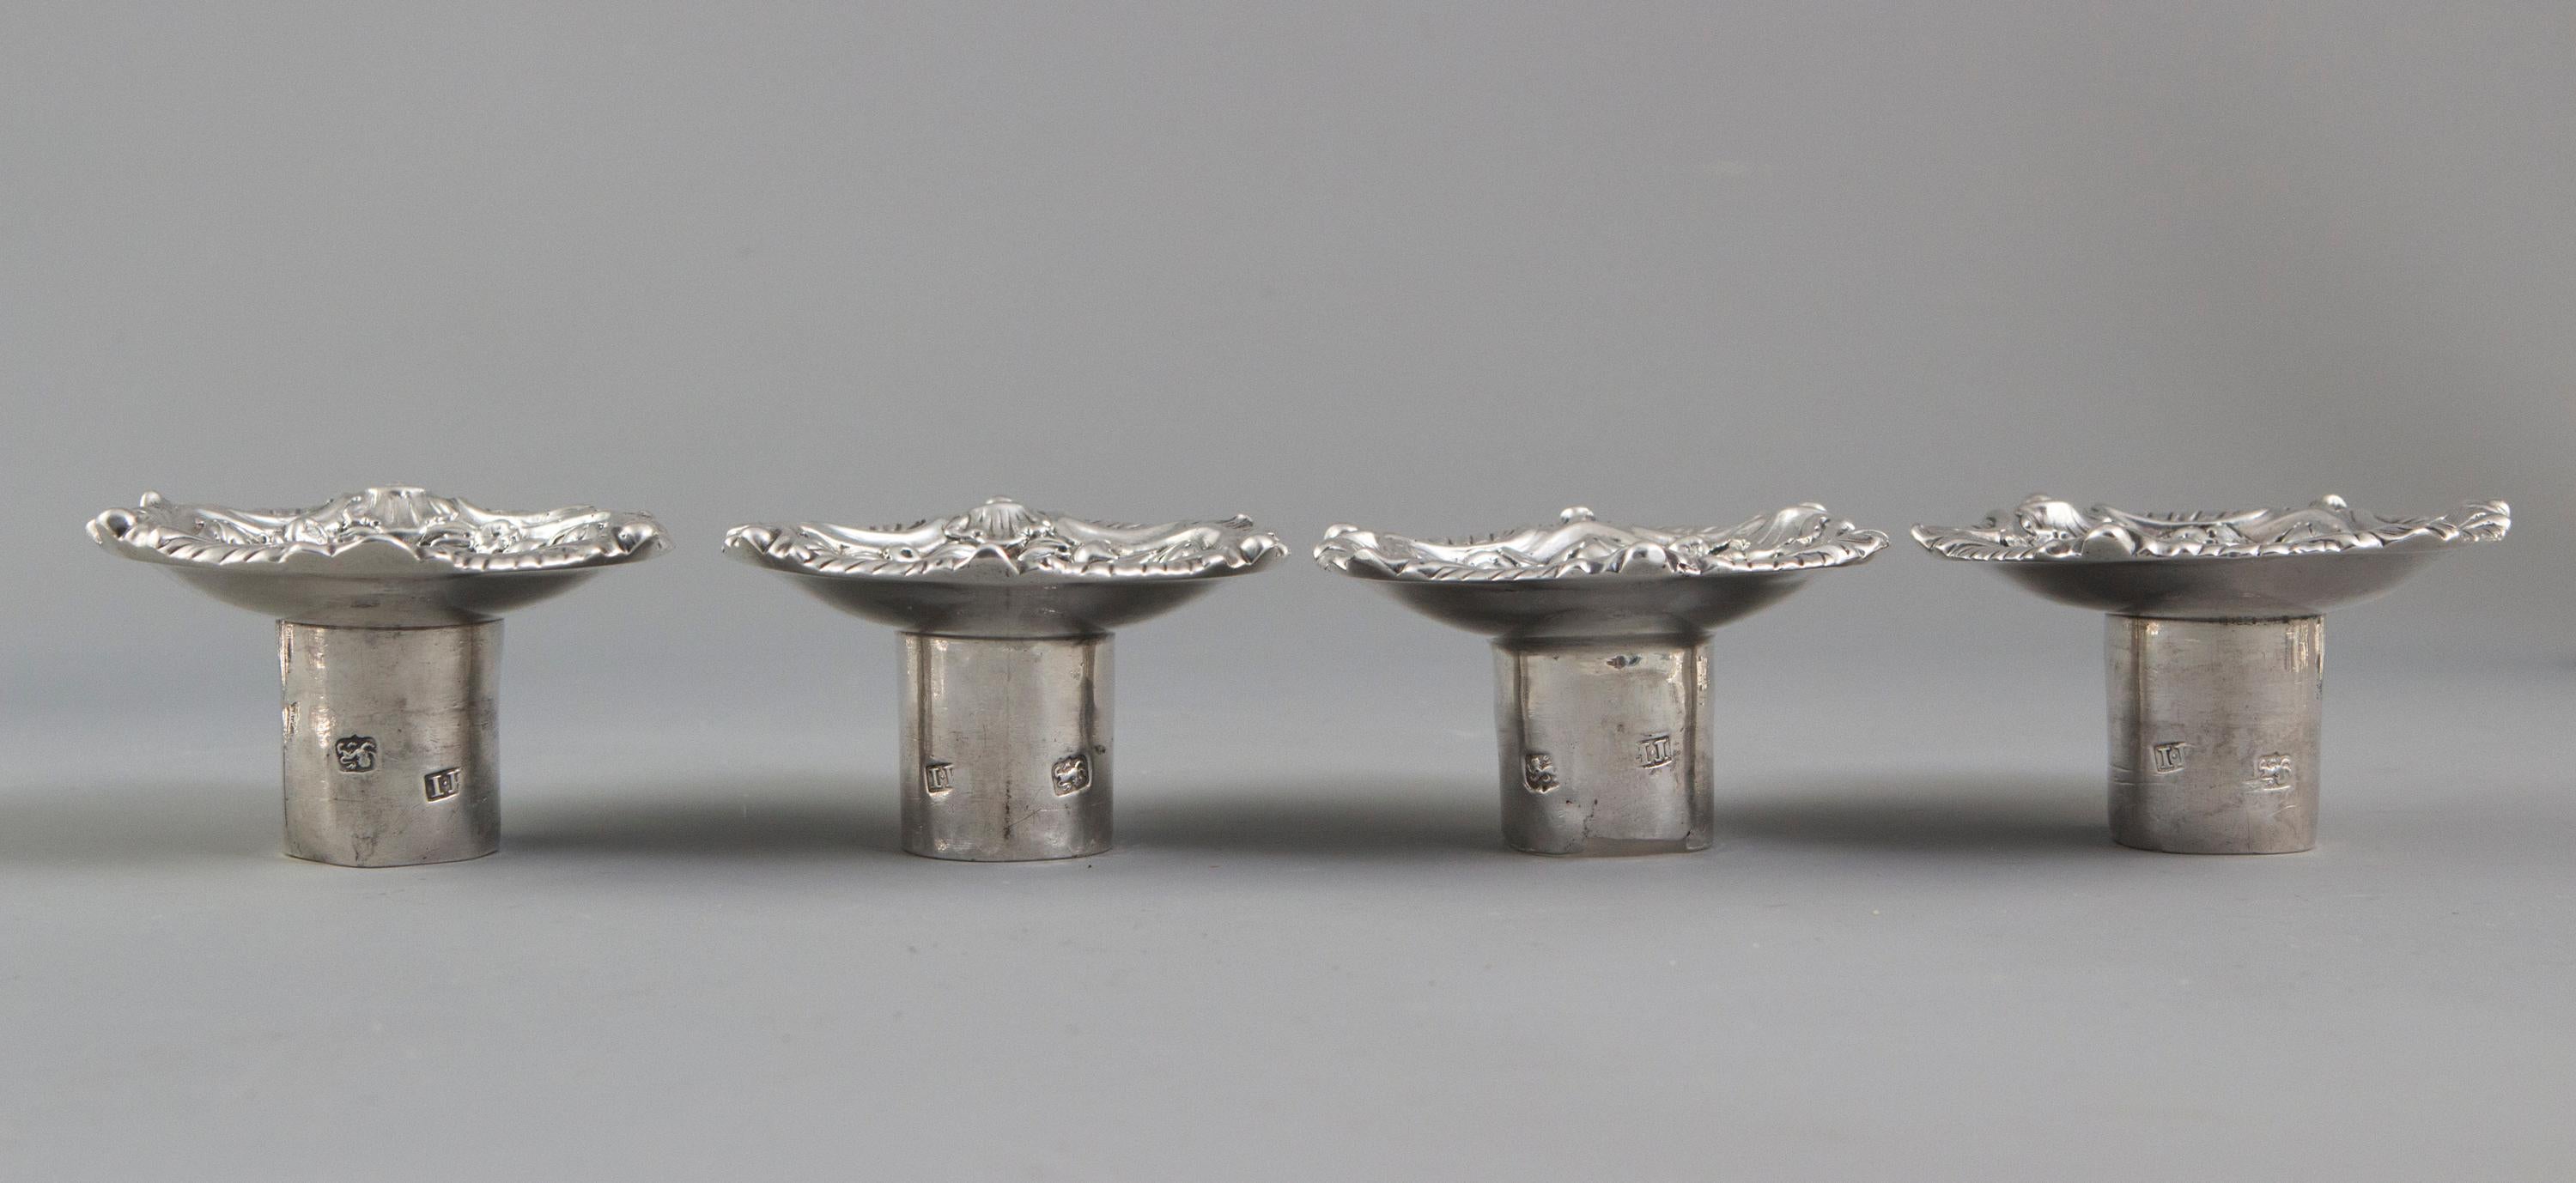 Mid-18th Century YSL Interest: a Set of 4 Cast George II Silver Rococo Candlesticks, London 1757